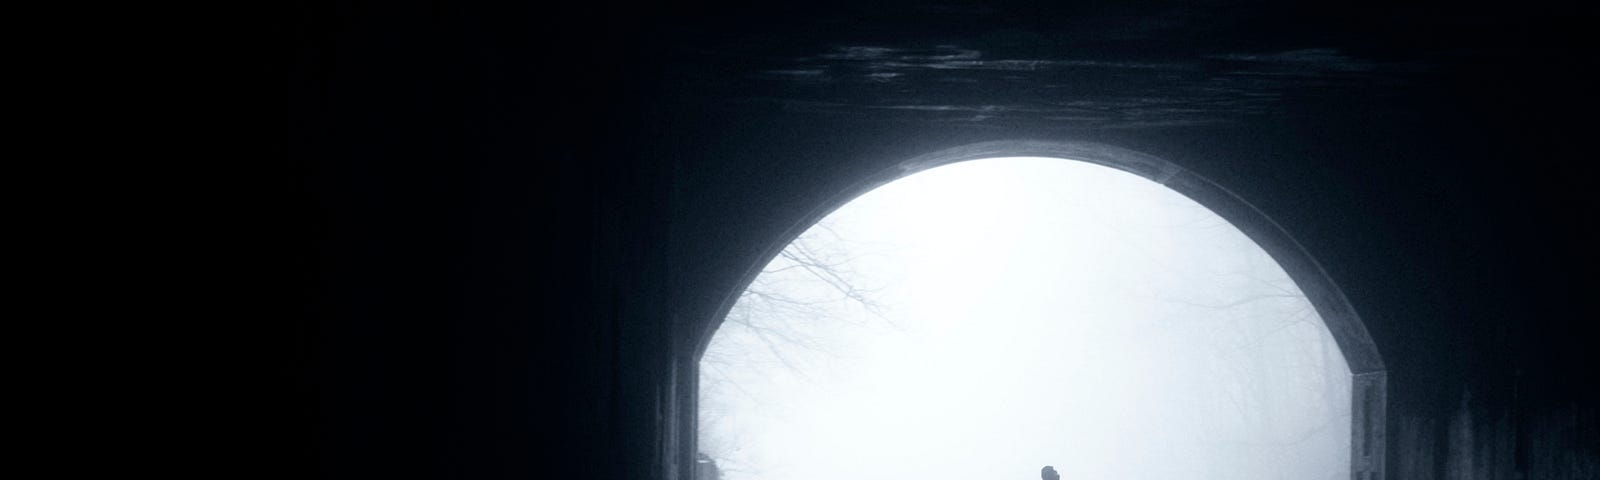 Silhouette of a person walking out from a tunnel during daytime.